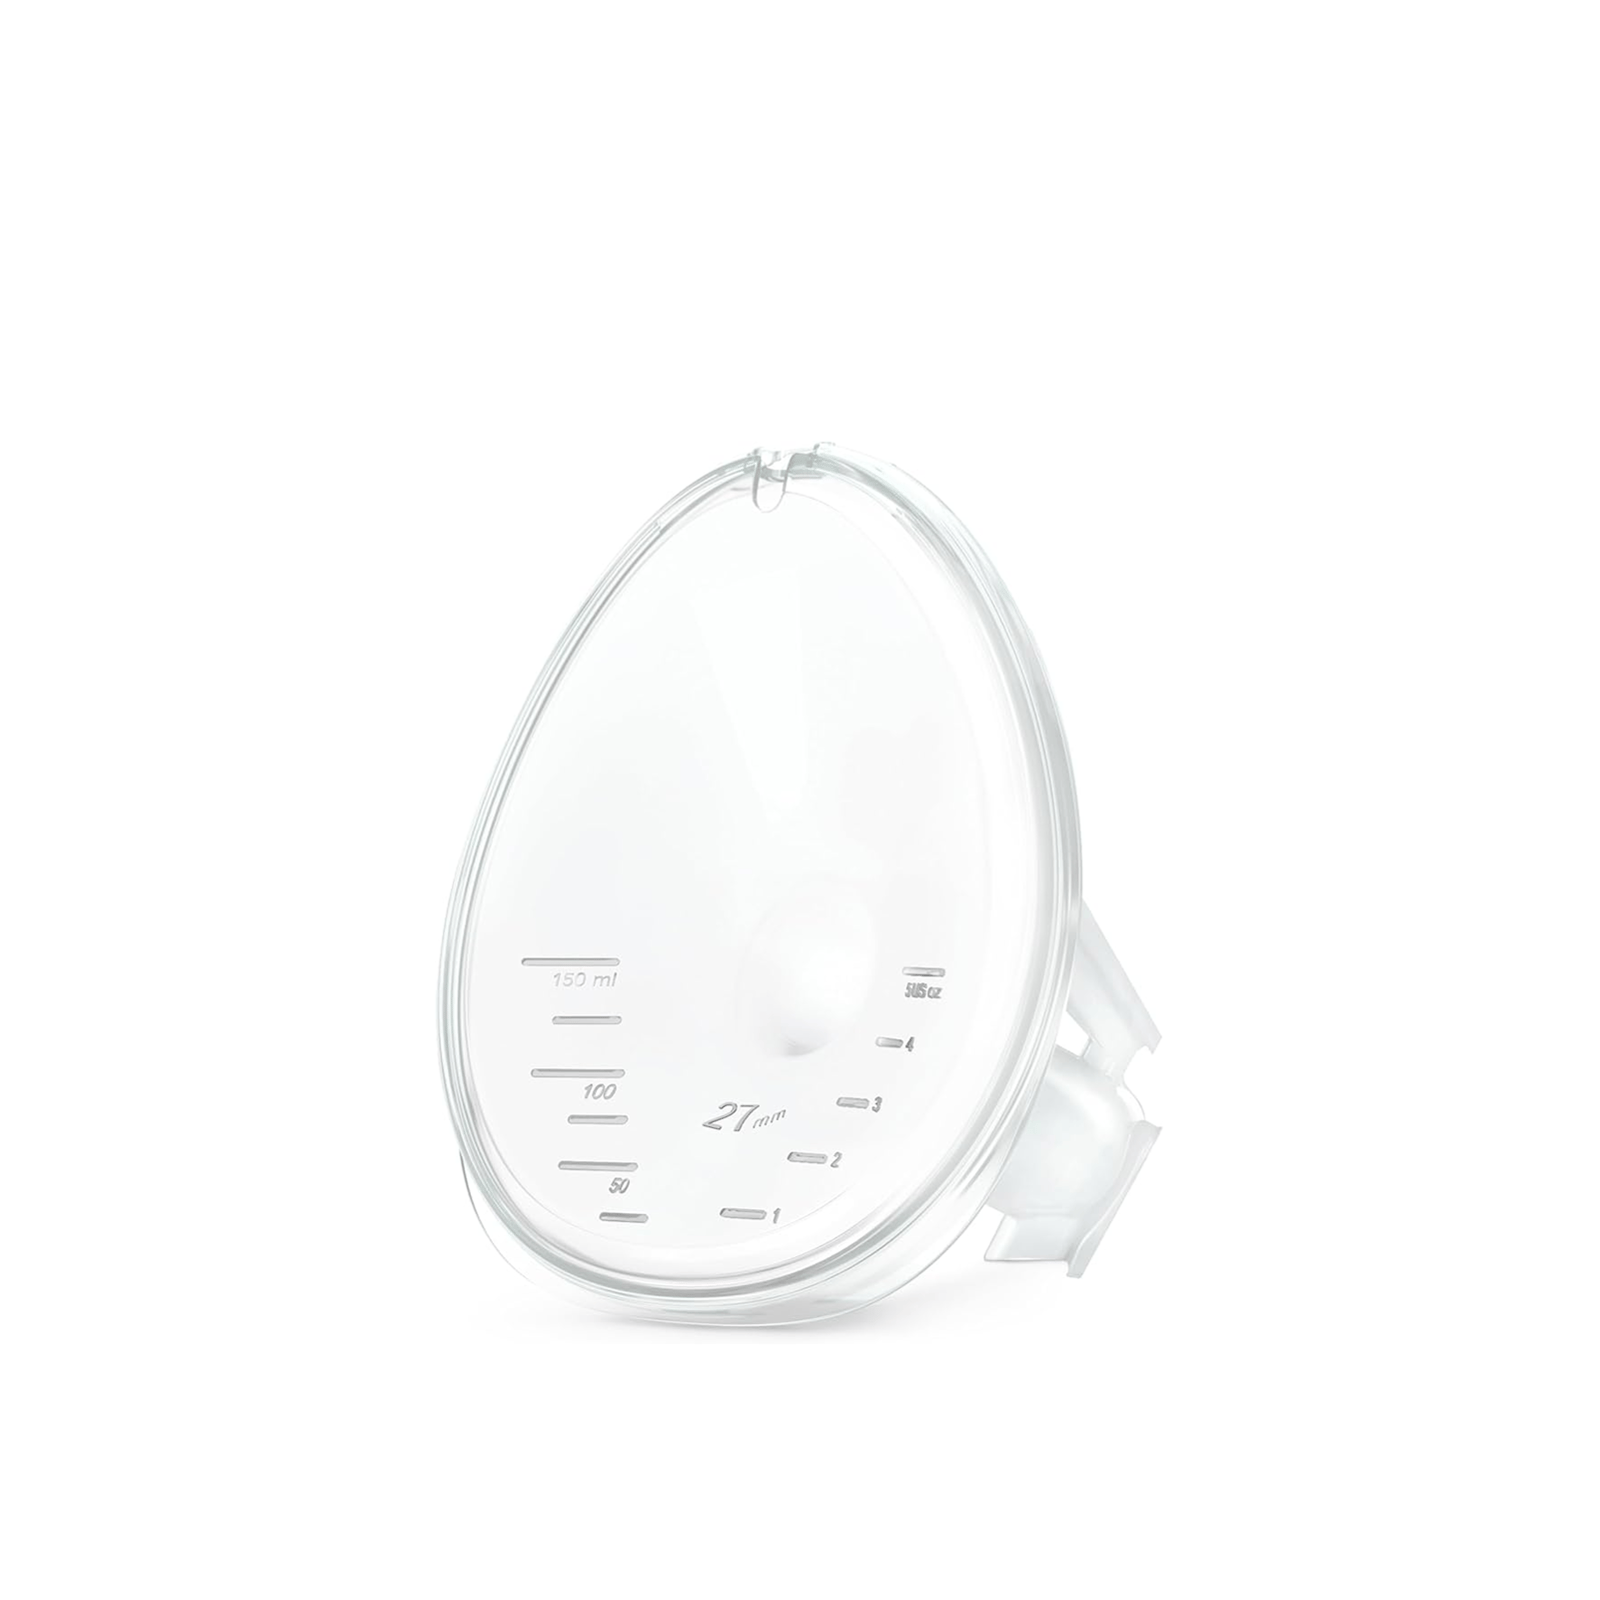 Medela Breast Shells available from online stockist Breastmates